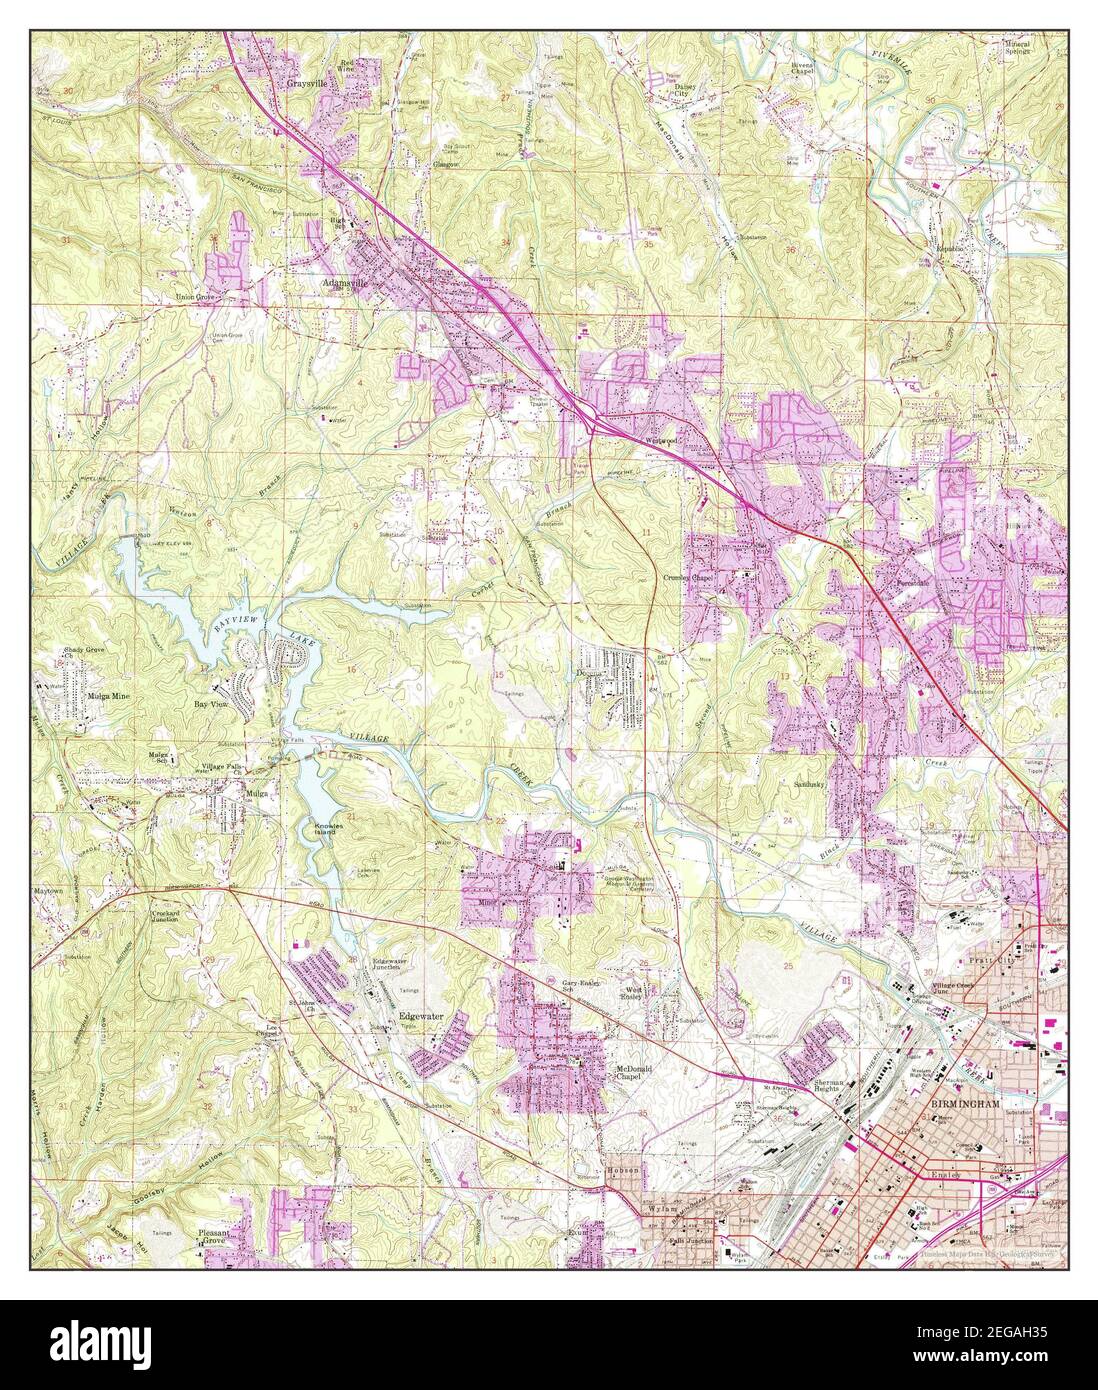 Adamsville, Alabama, map 1959, 1:24000, United States of America by Timeless Maps, data U.S. Geological Survey Stock Photo